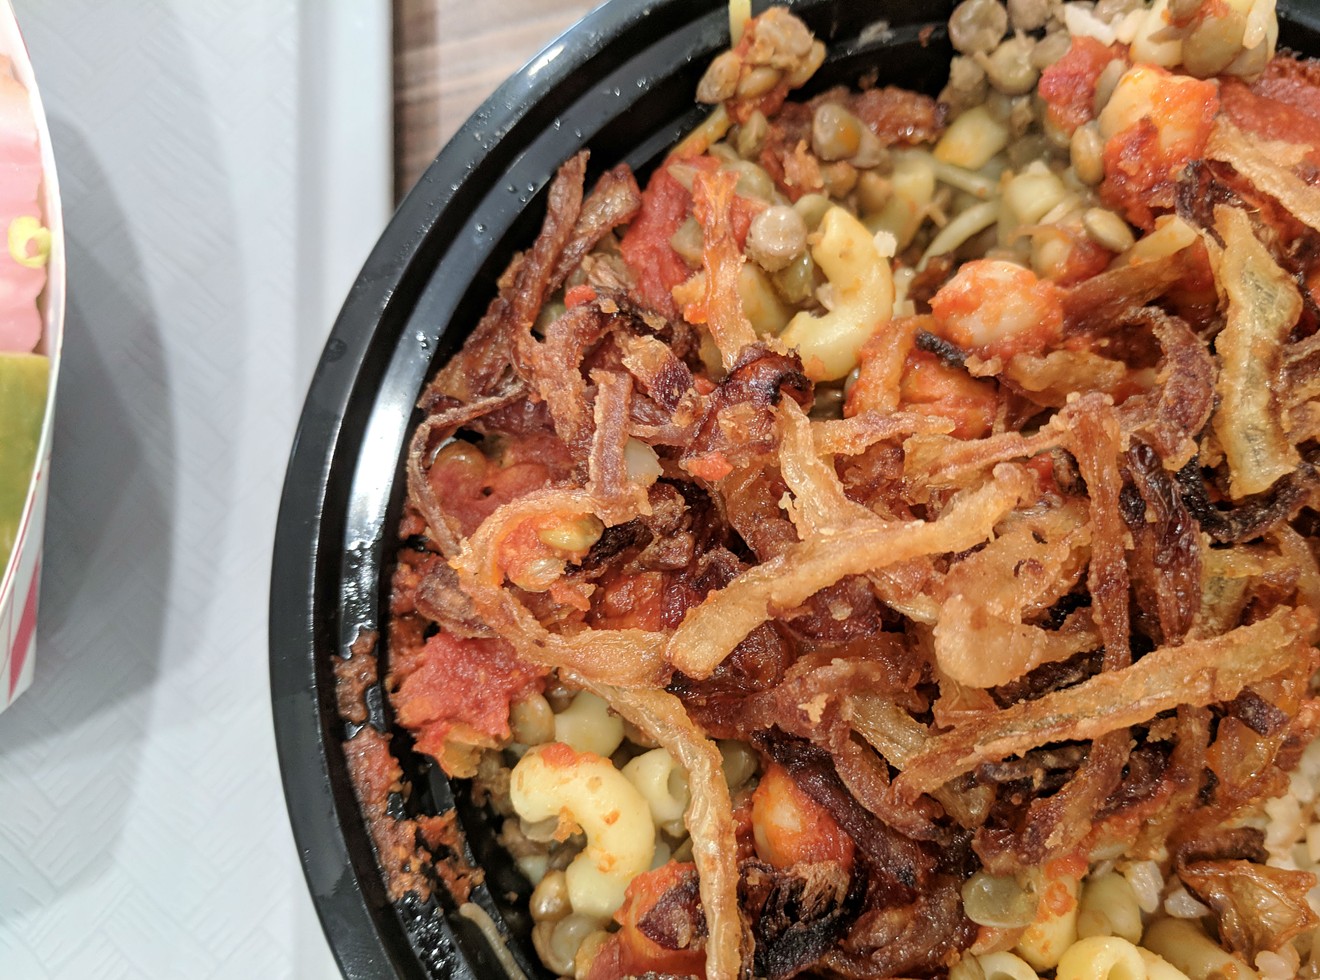 Koshari is a comforting vegetarian dish made with lentils, macaroni noodles and rice, and it's the star at Mubrooka Egyptian Street Food.